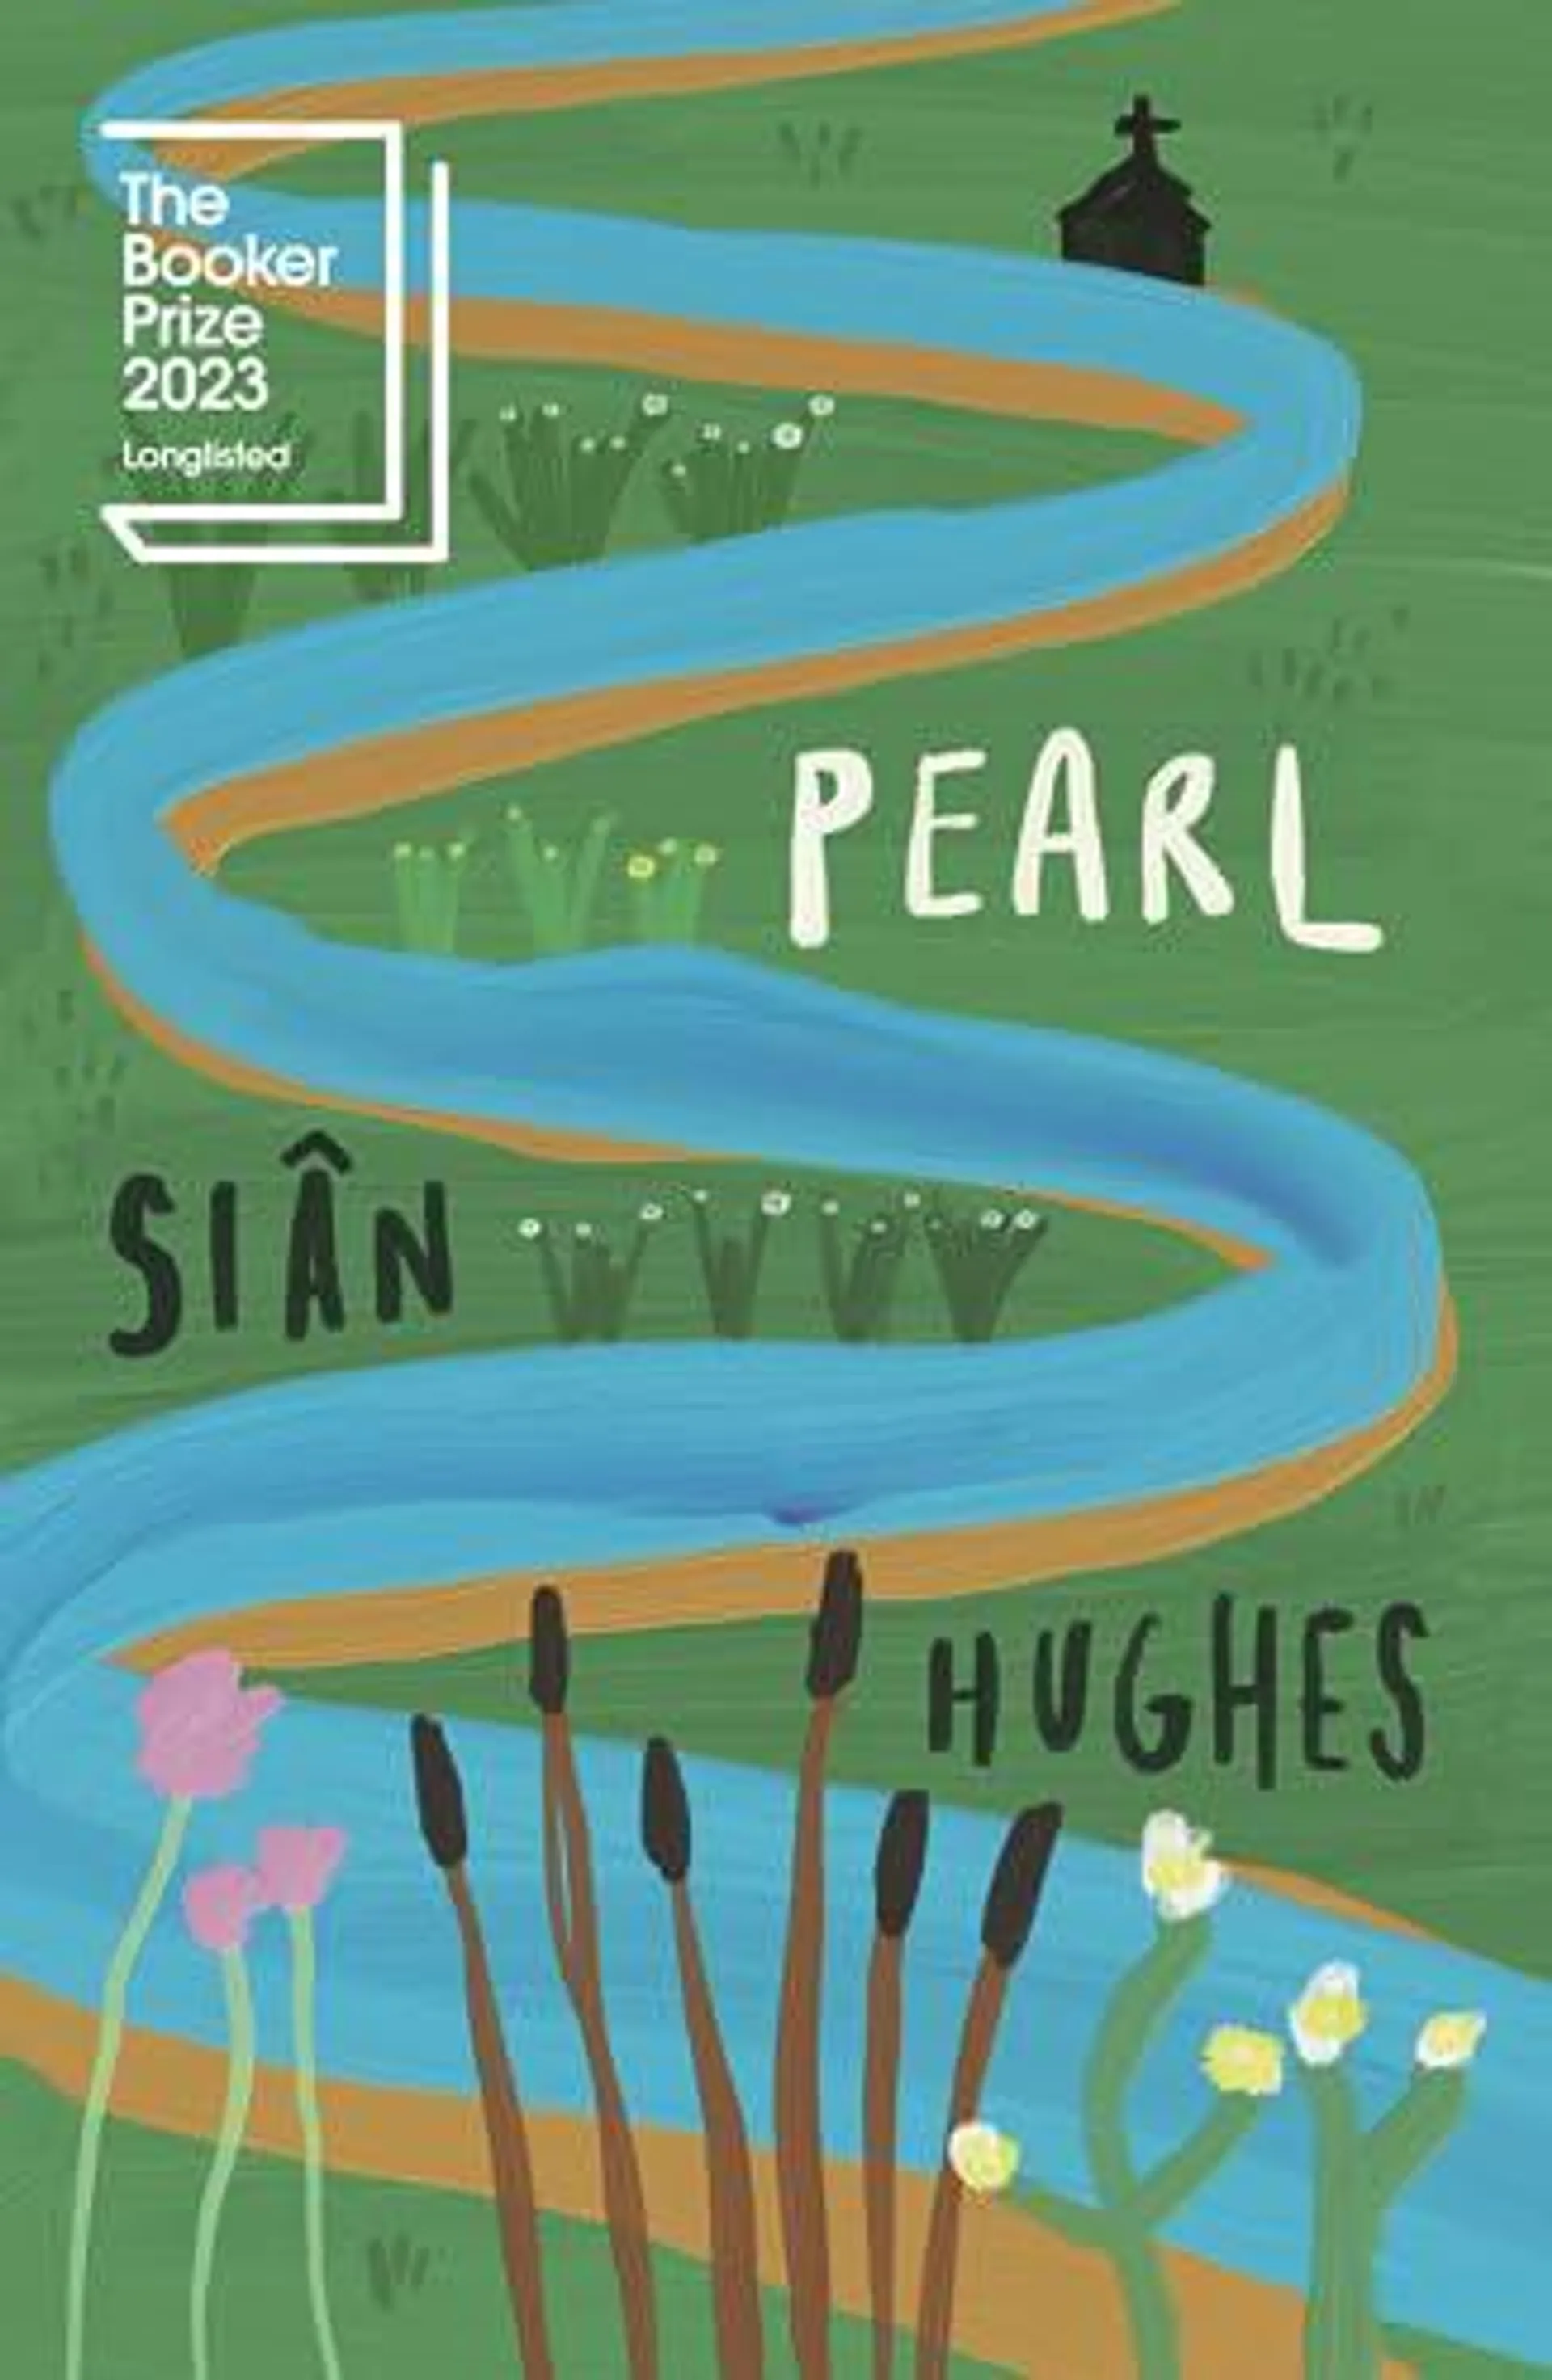 Pearl by Sian Hughes (, Magpie Books)